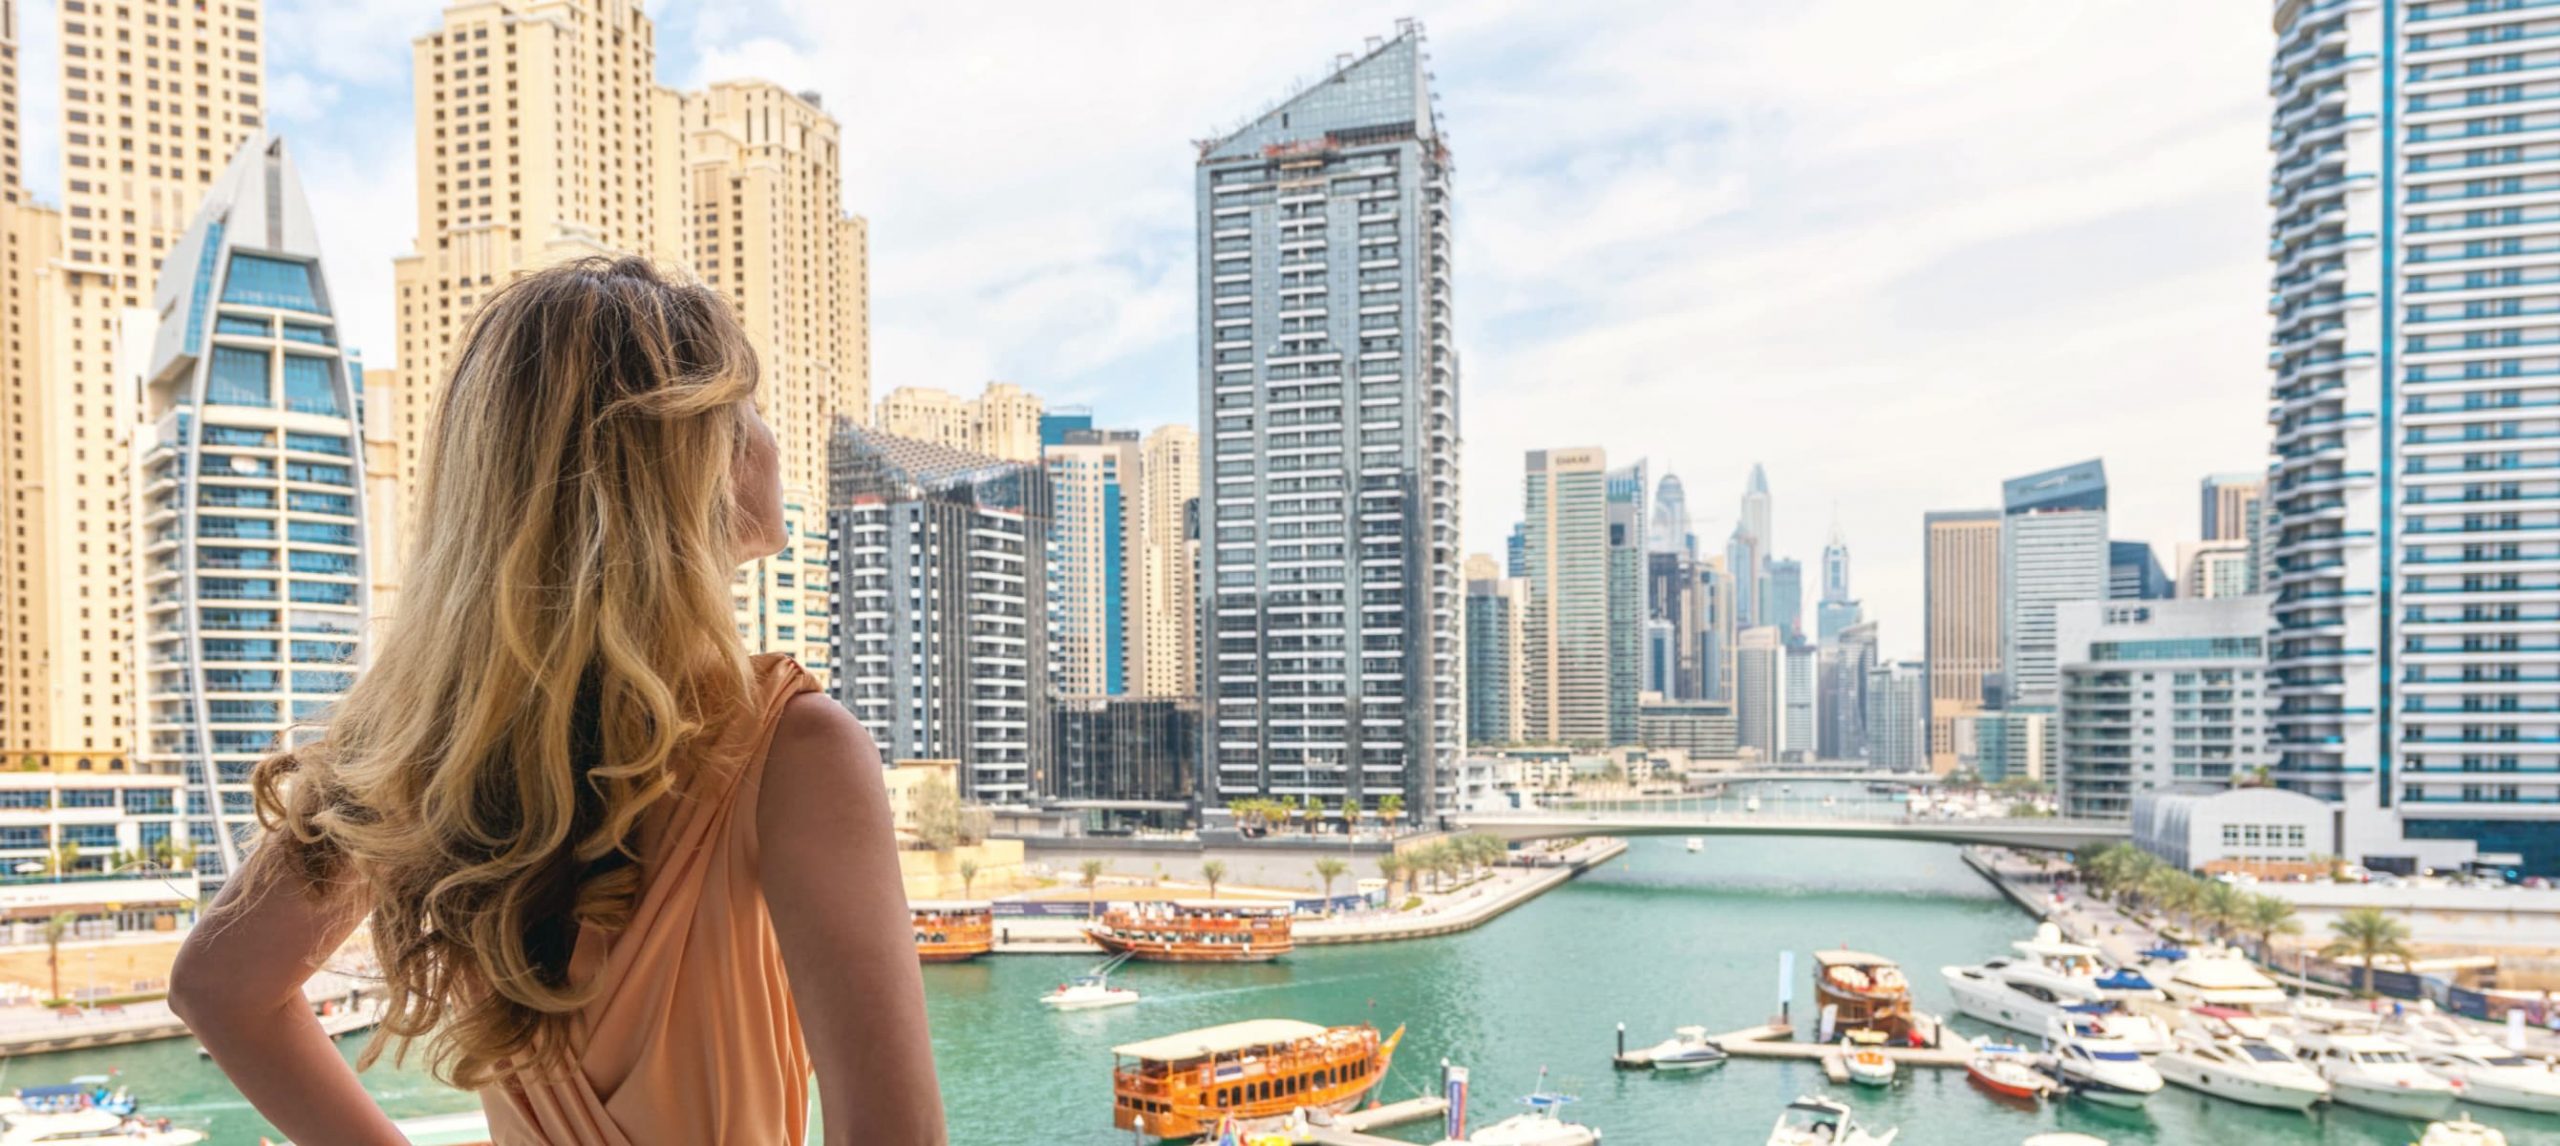 10 Top-Rated Places To Visit In Dubai, UAE